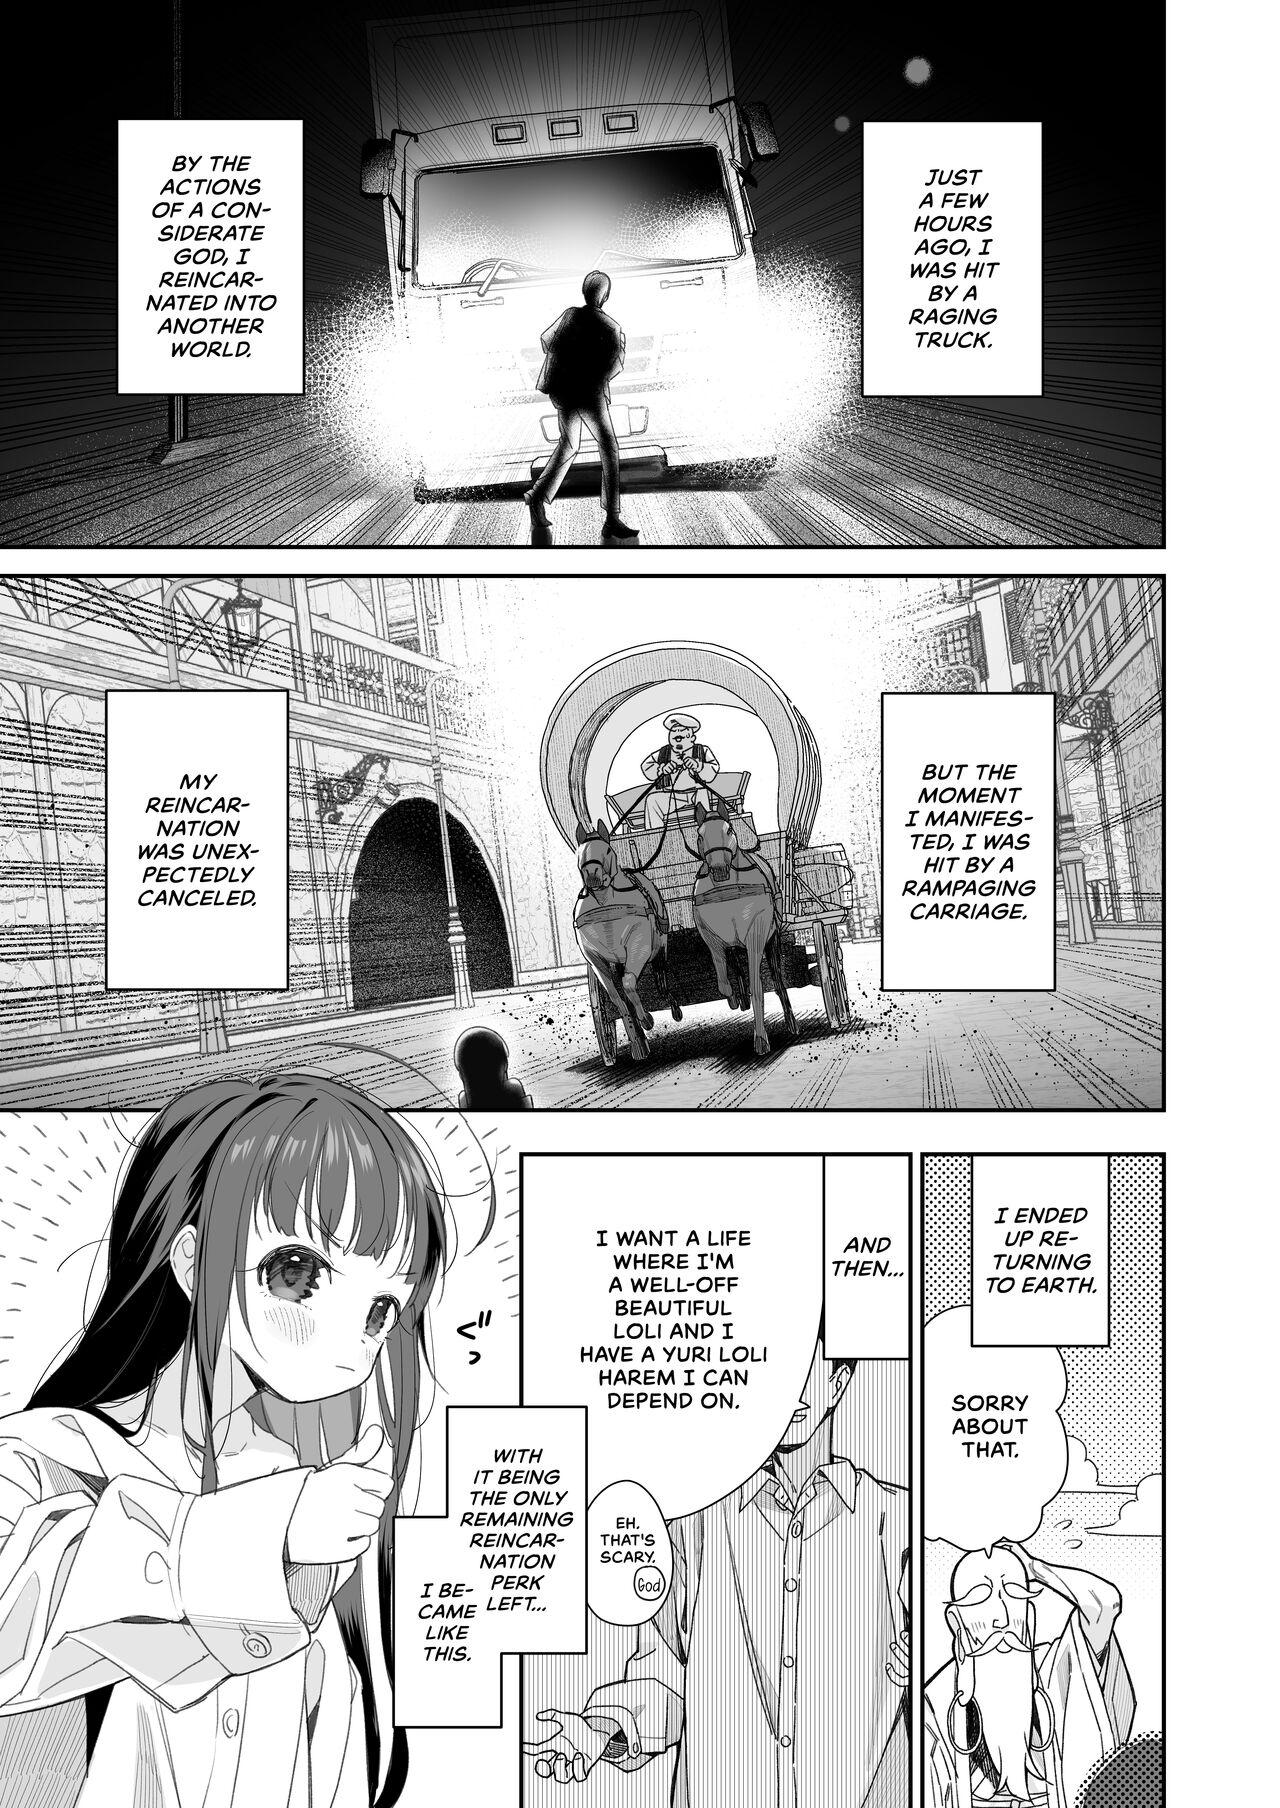 Free Porn Amateur [Asunaro Neat. (Ronna)] TS Loli Oji-san no Bouken Onanie Hen | The Adventures of an Old Man Who Was Gender-Swapped Into a Loli ~Masturbation Chapter~ [English] [CulturedCommissions] [Digital] - Original Travesti - Page 4